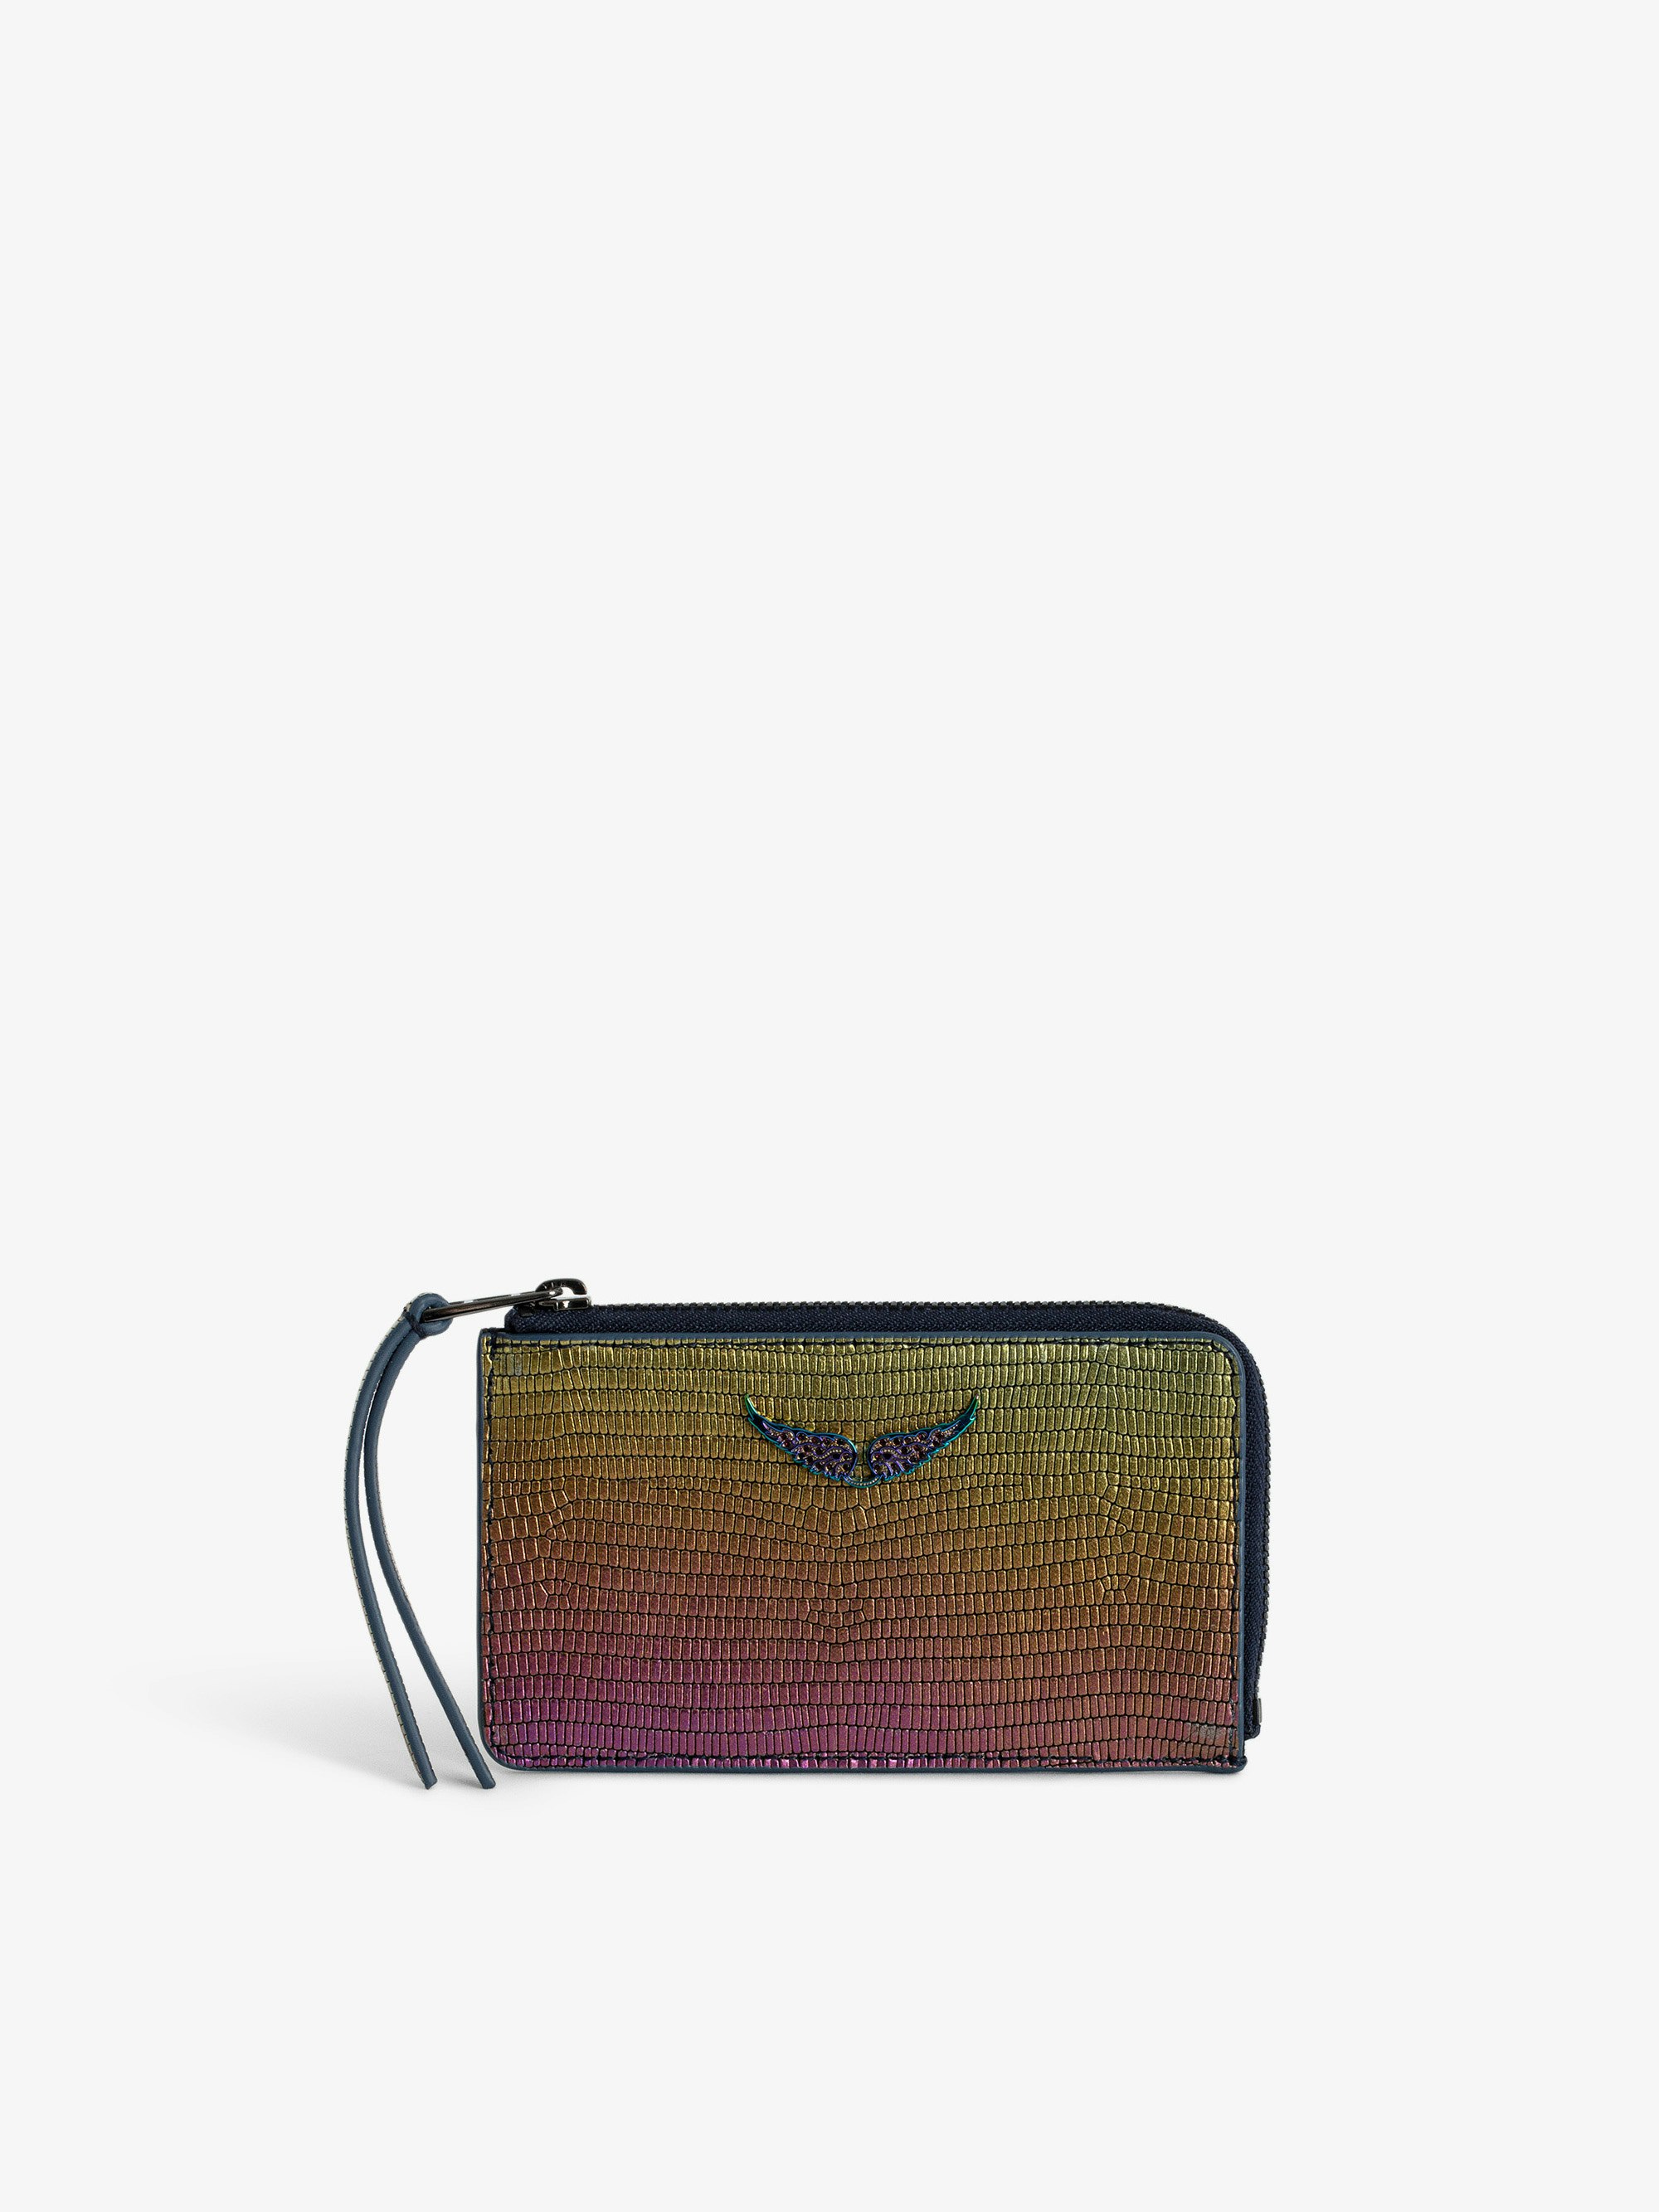 ZV Card Card Holder - Rainbow iguana-embossed metallic leather card holder with diamanté wings charm.